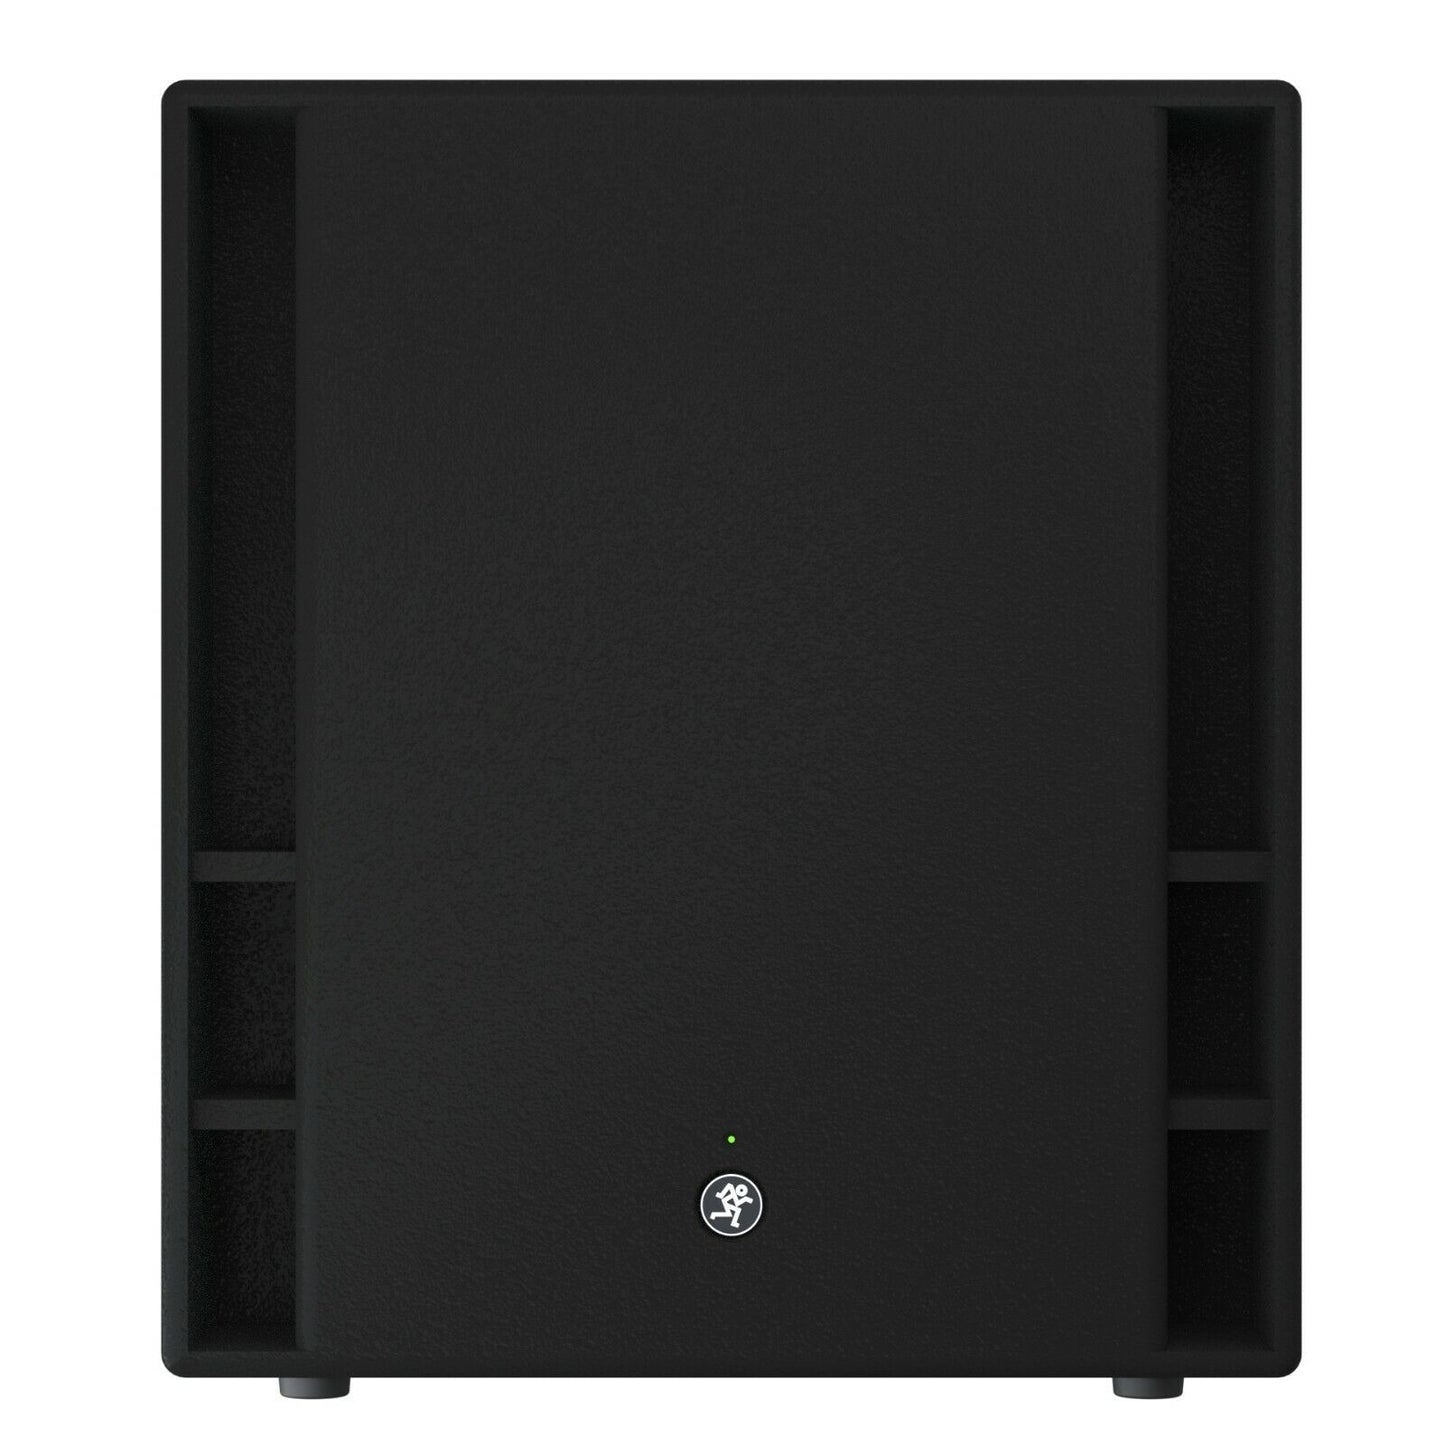 Mackie THUMP18S 18" Powered Subwoofer with Dual XLR Inputs & Adjustable Controls